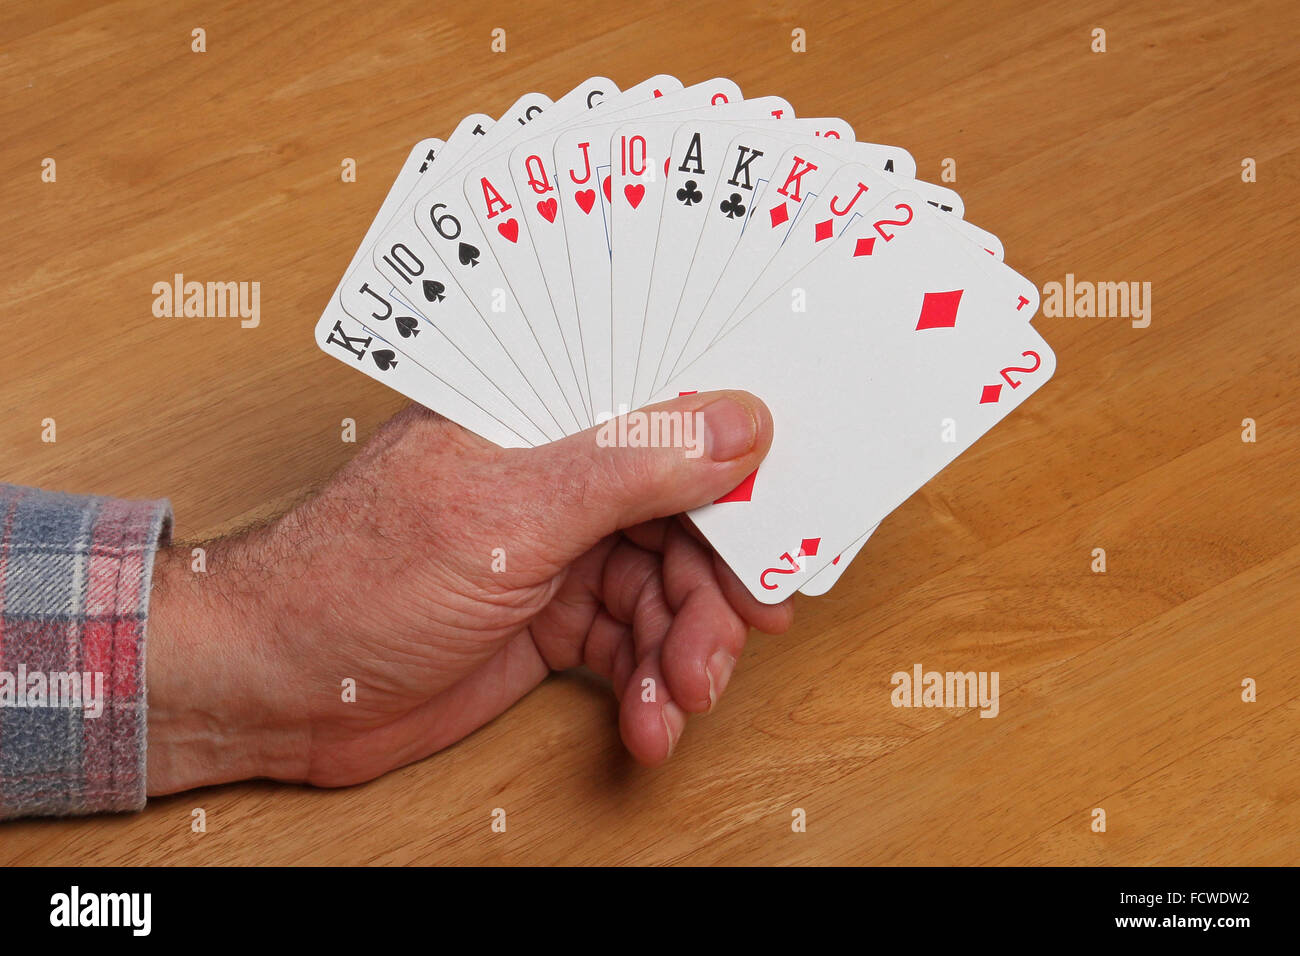 ACOL Contract Bridge Hand. With 12 to 14 points and a balanced hand open the bidding 1NT. Stock Photo